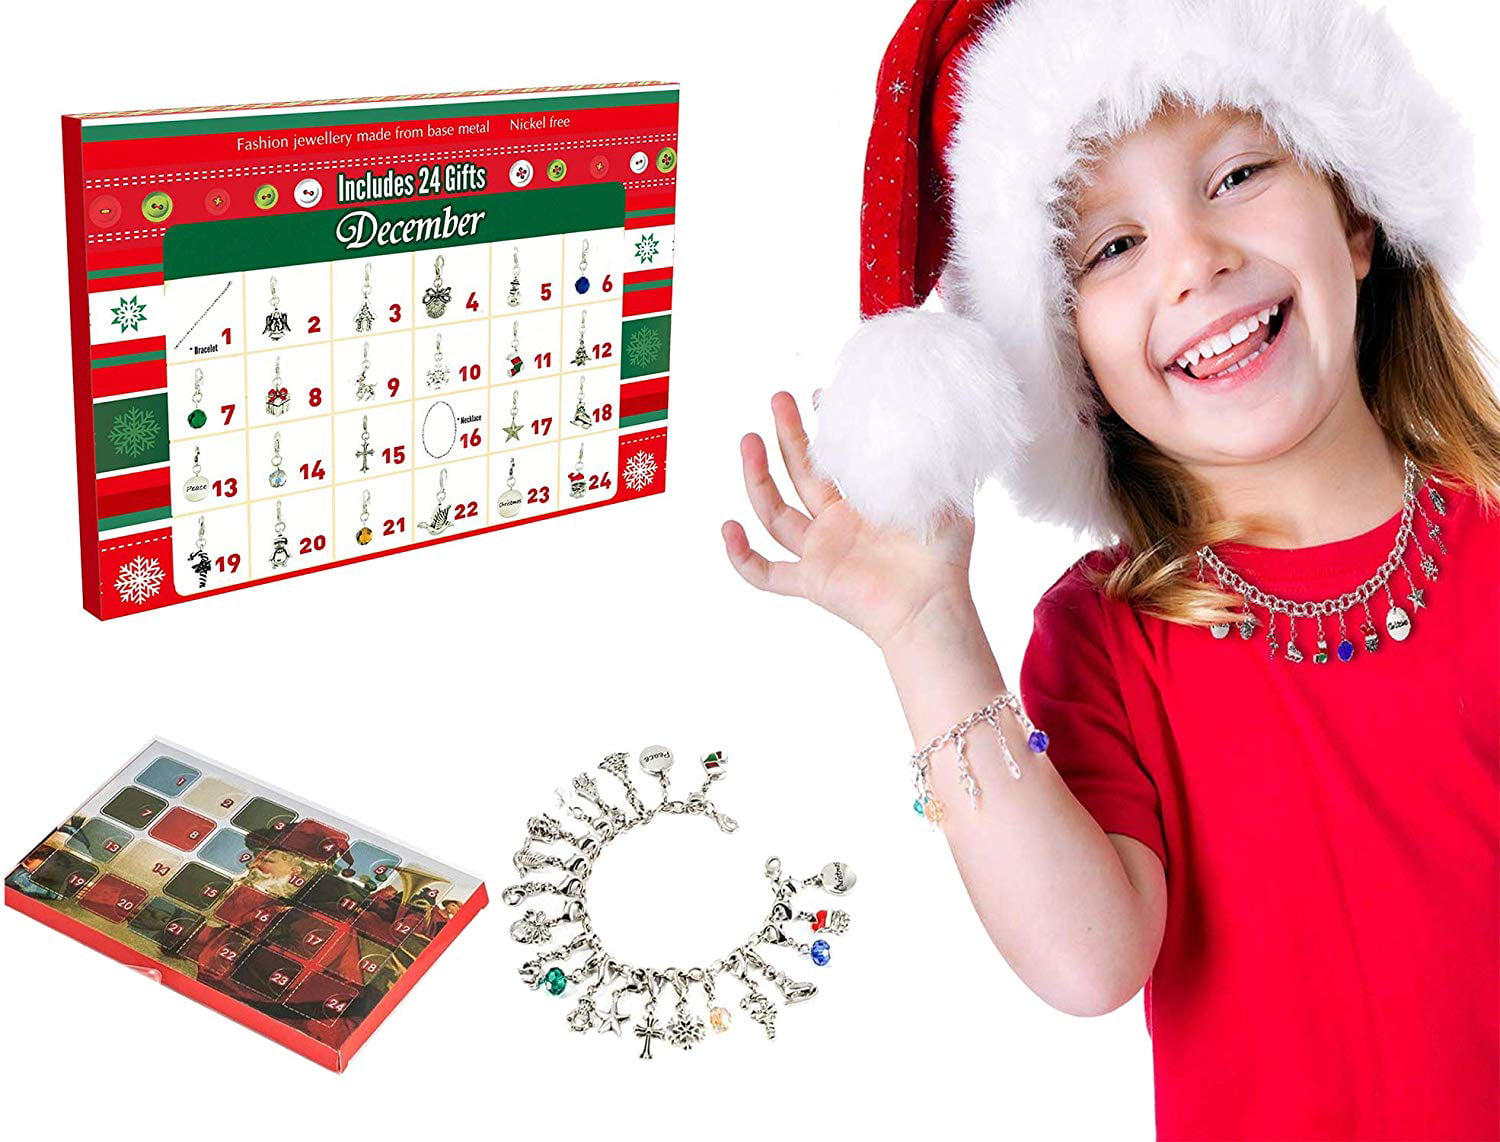 Kariwell 24 Days Christmas Advent Calendar 2020 Christmas Countdown Calendar 24 Charms with Bracelet Necklace Set Fashion Jewelry for Kids 